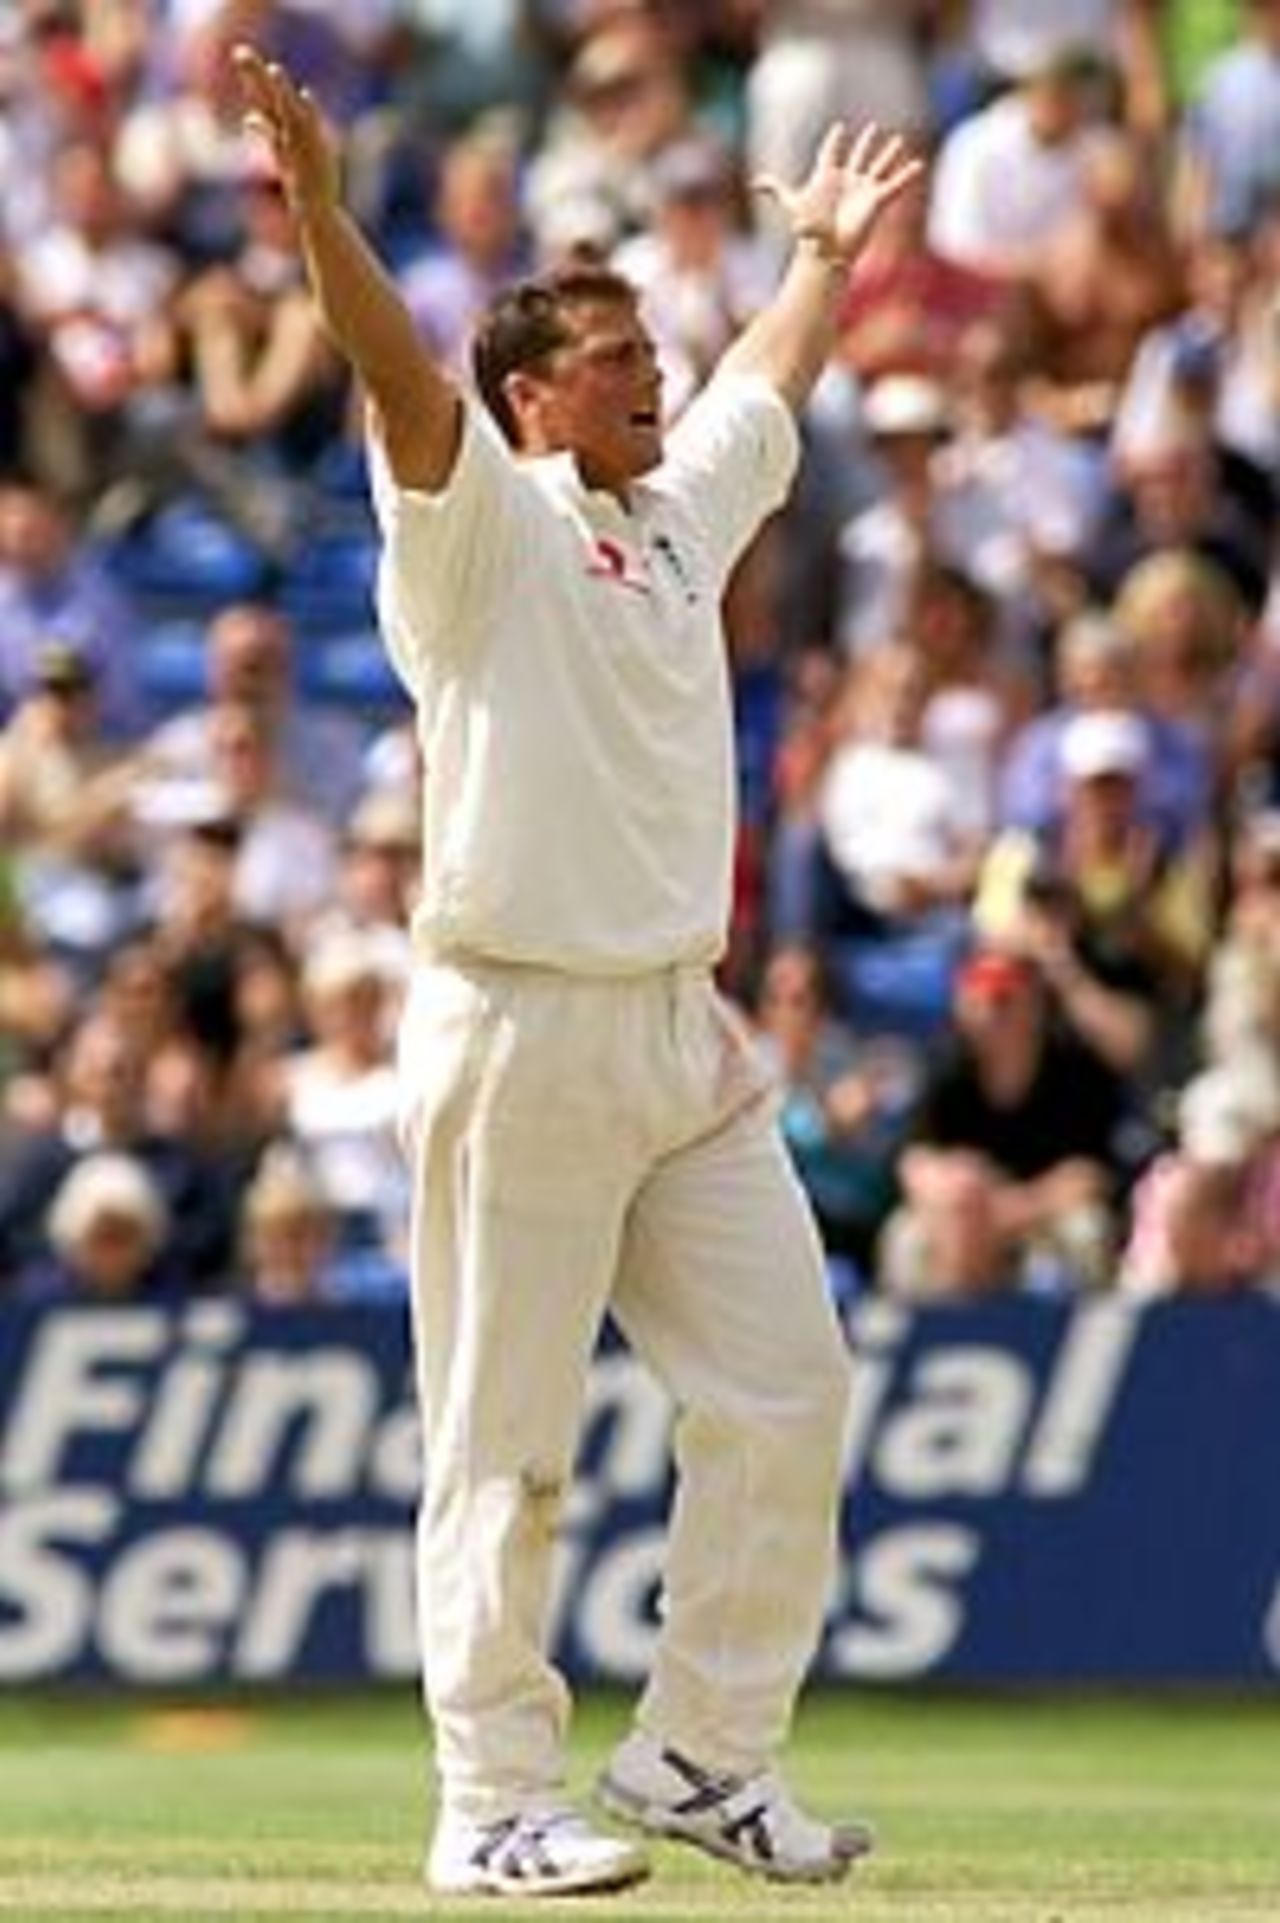 Darren Gough of England claims the wicket of Adam Gilchrist of Australia, caught by Marcus Trescothick for 19, during day two of the fourth test between England and Australia at Headingley, Leeds, England.